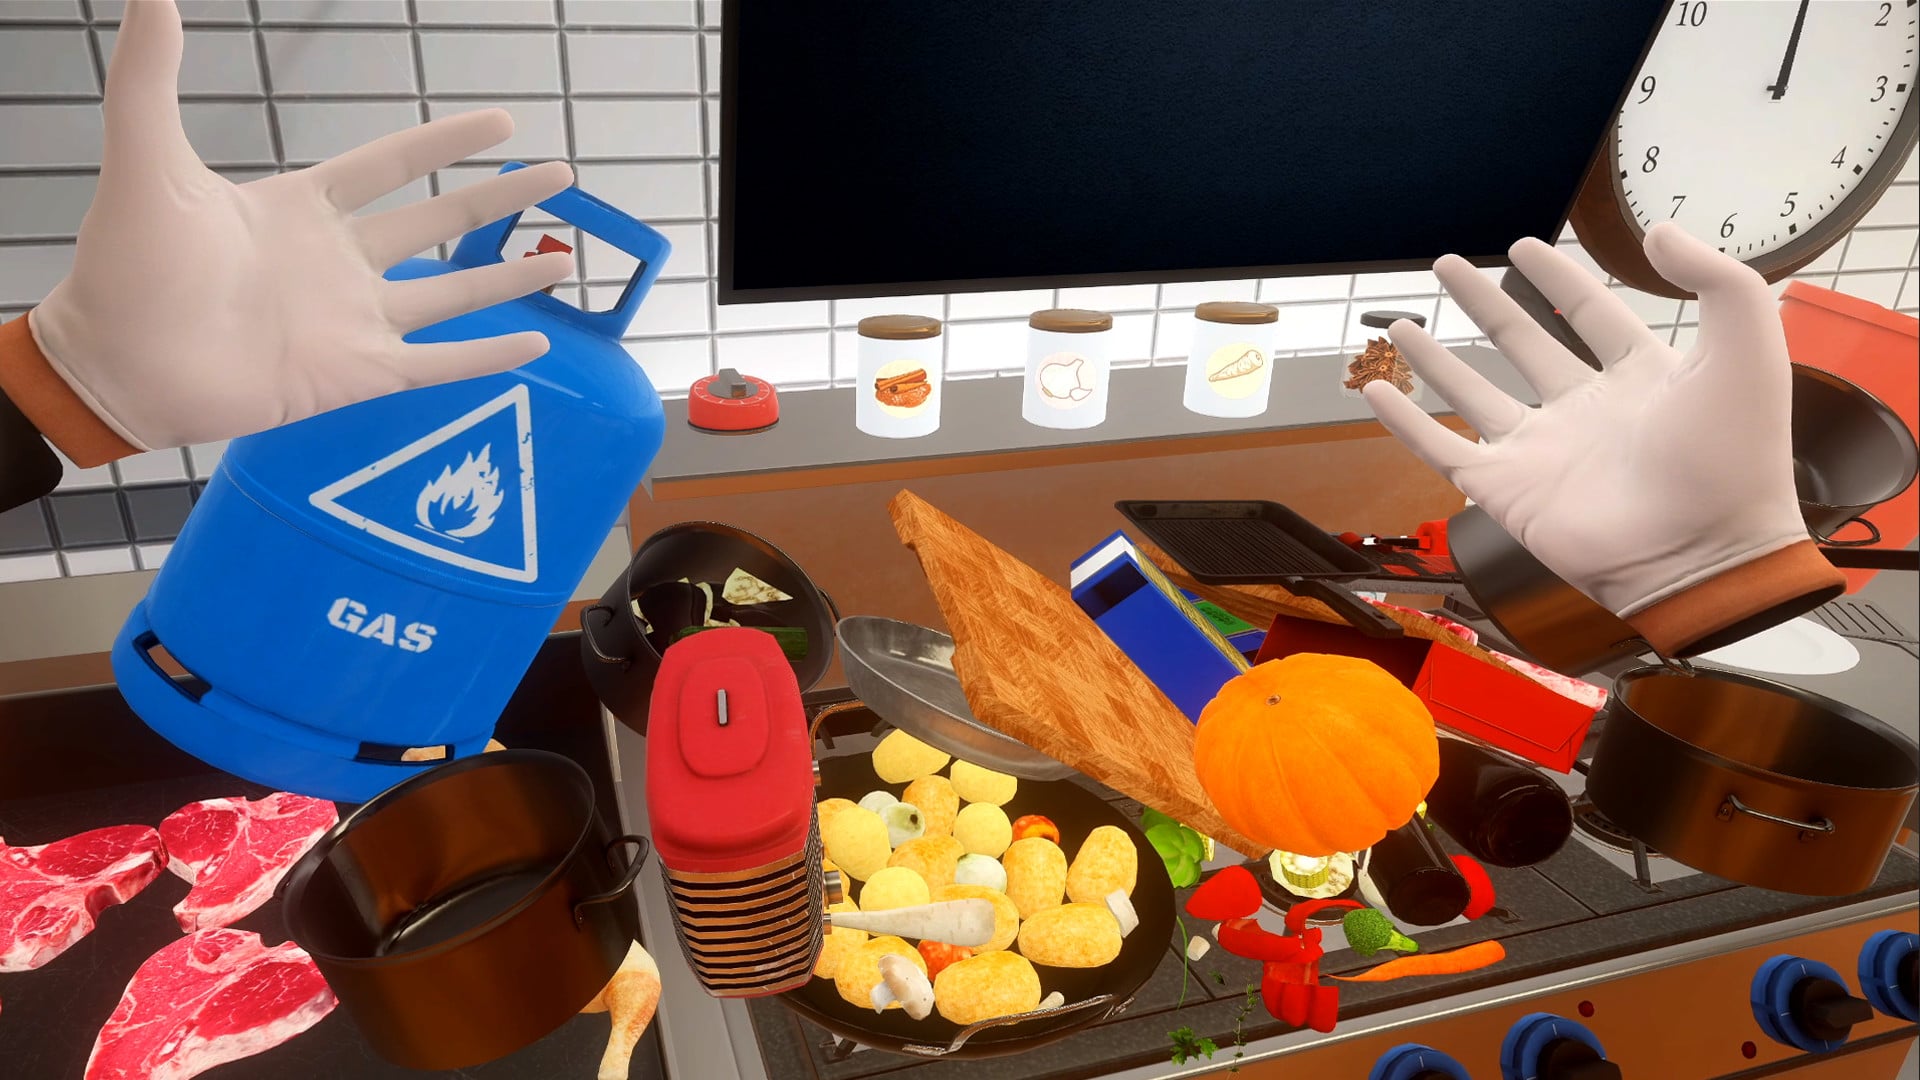 Cooking Simulator VR Review A Frantic Celebration Of VR Realism And Chaos